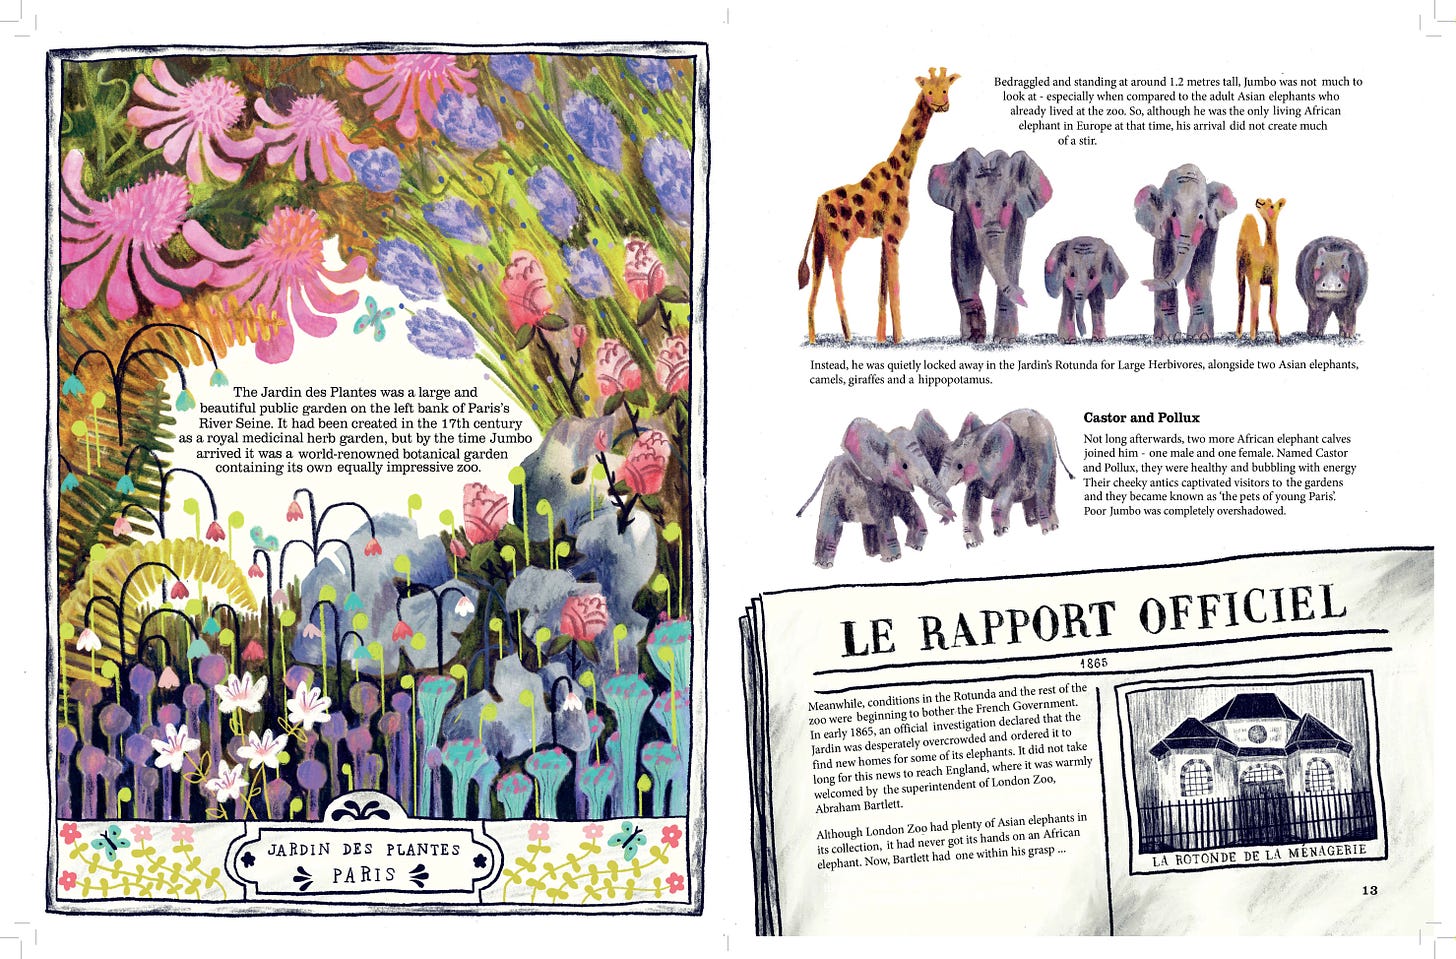 Illustration of a postcard depicting the Jardin Des Plantes in Paris, an official report about the rotunda de la menagerie, and several animals.